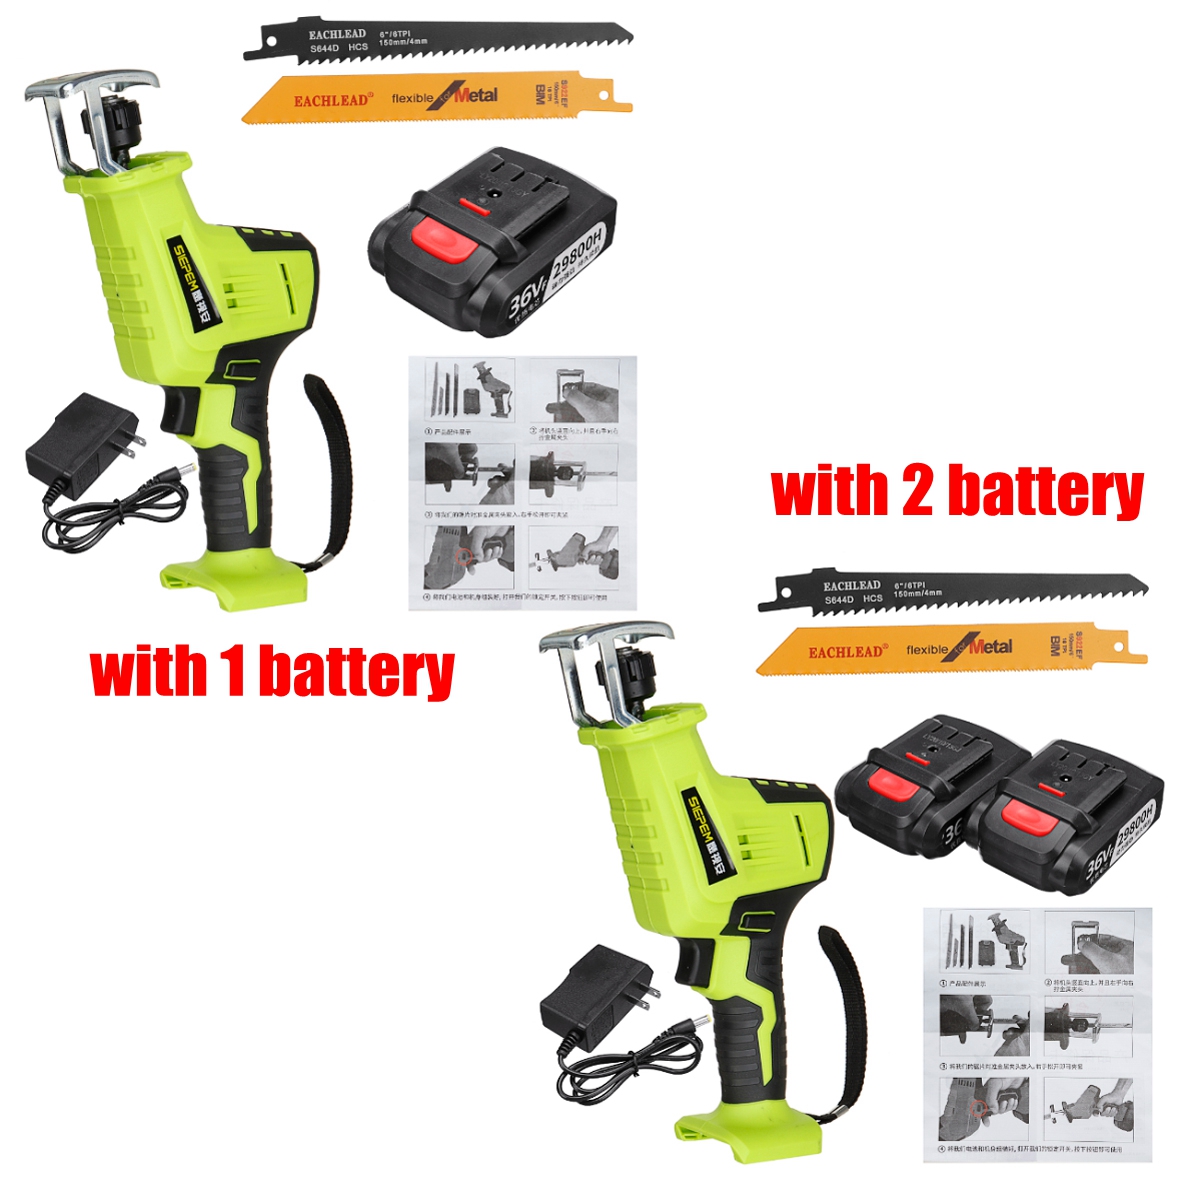 12V-Cordless-Electric-Reciprocating-Saw-Portable-Garden-Cutting-Tool-Saws-with-1-or-2-Battery-1772582-12